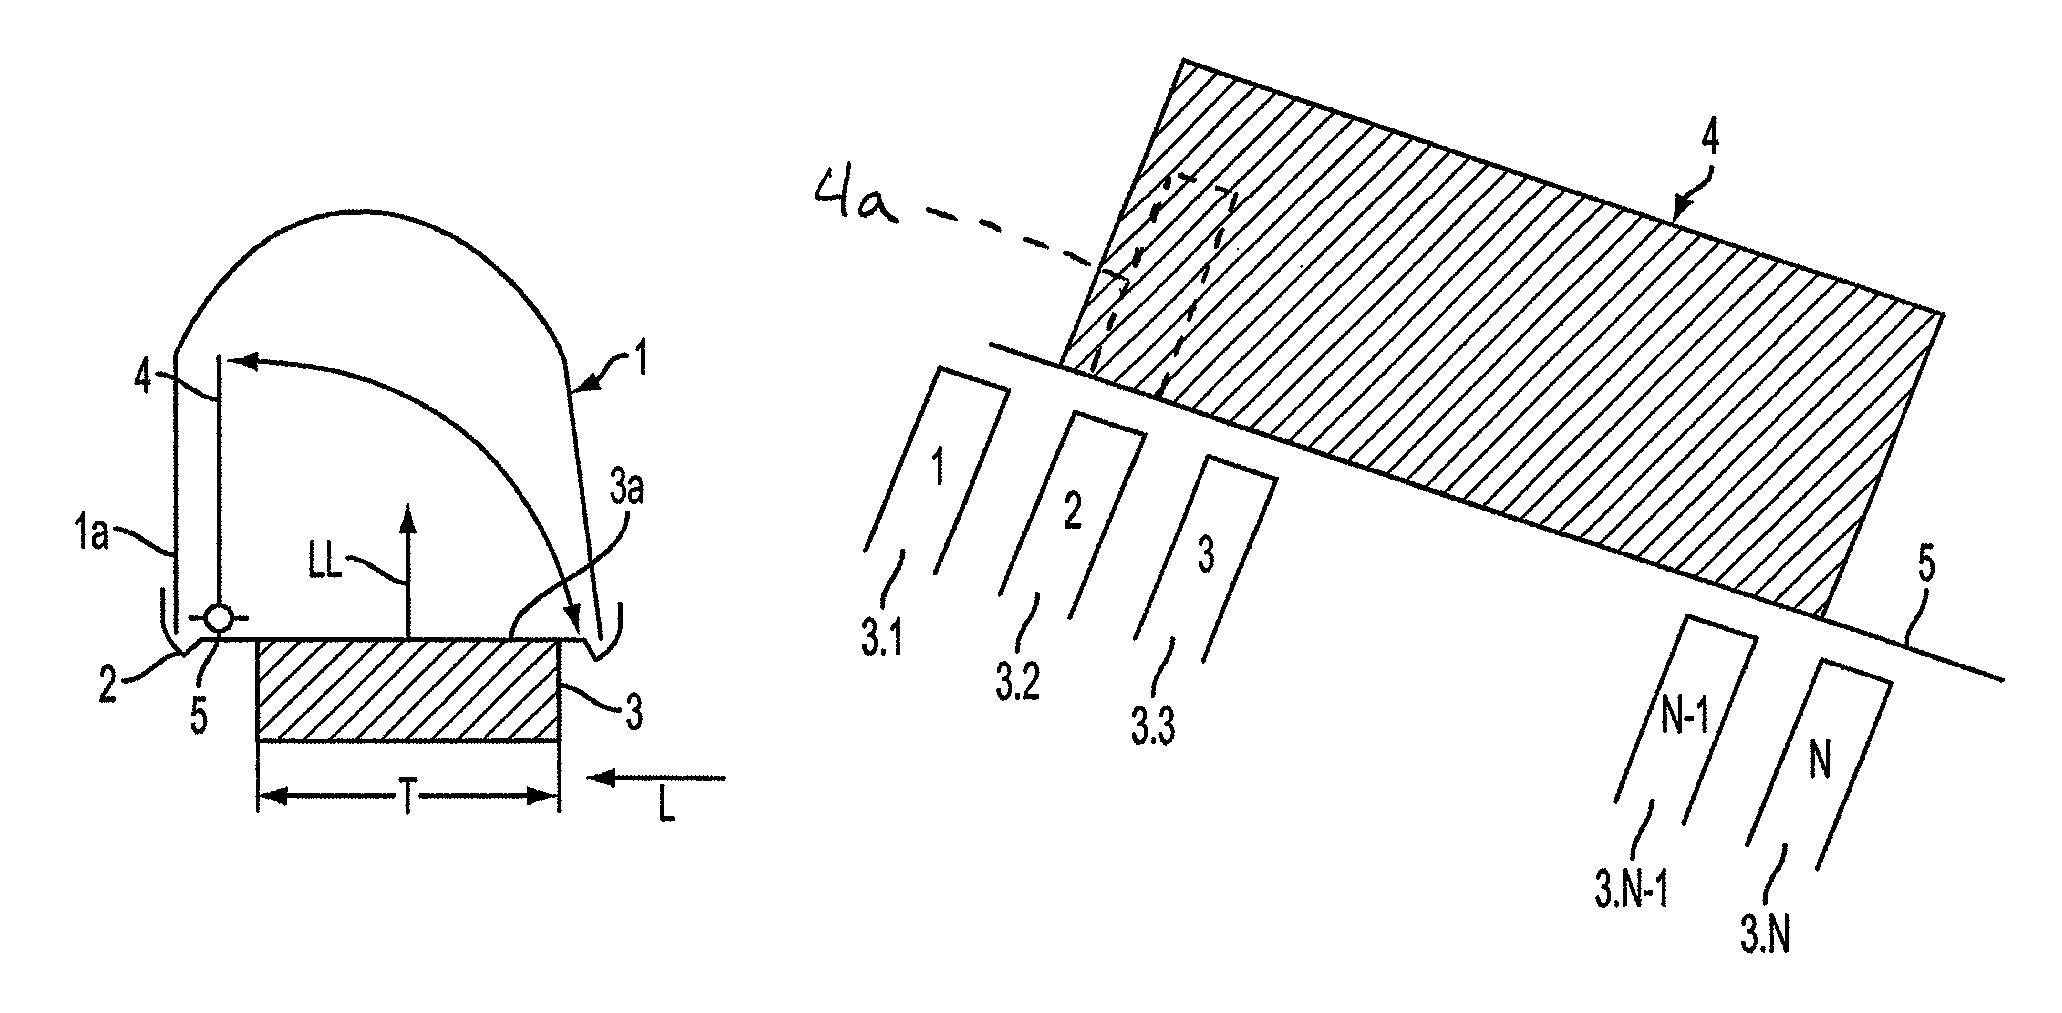 Charge intercooler for a motor vehicle